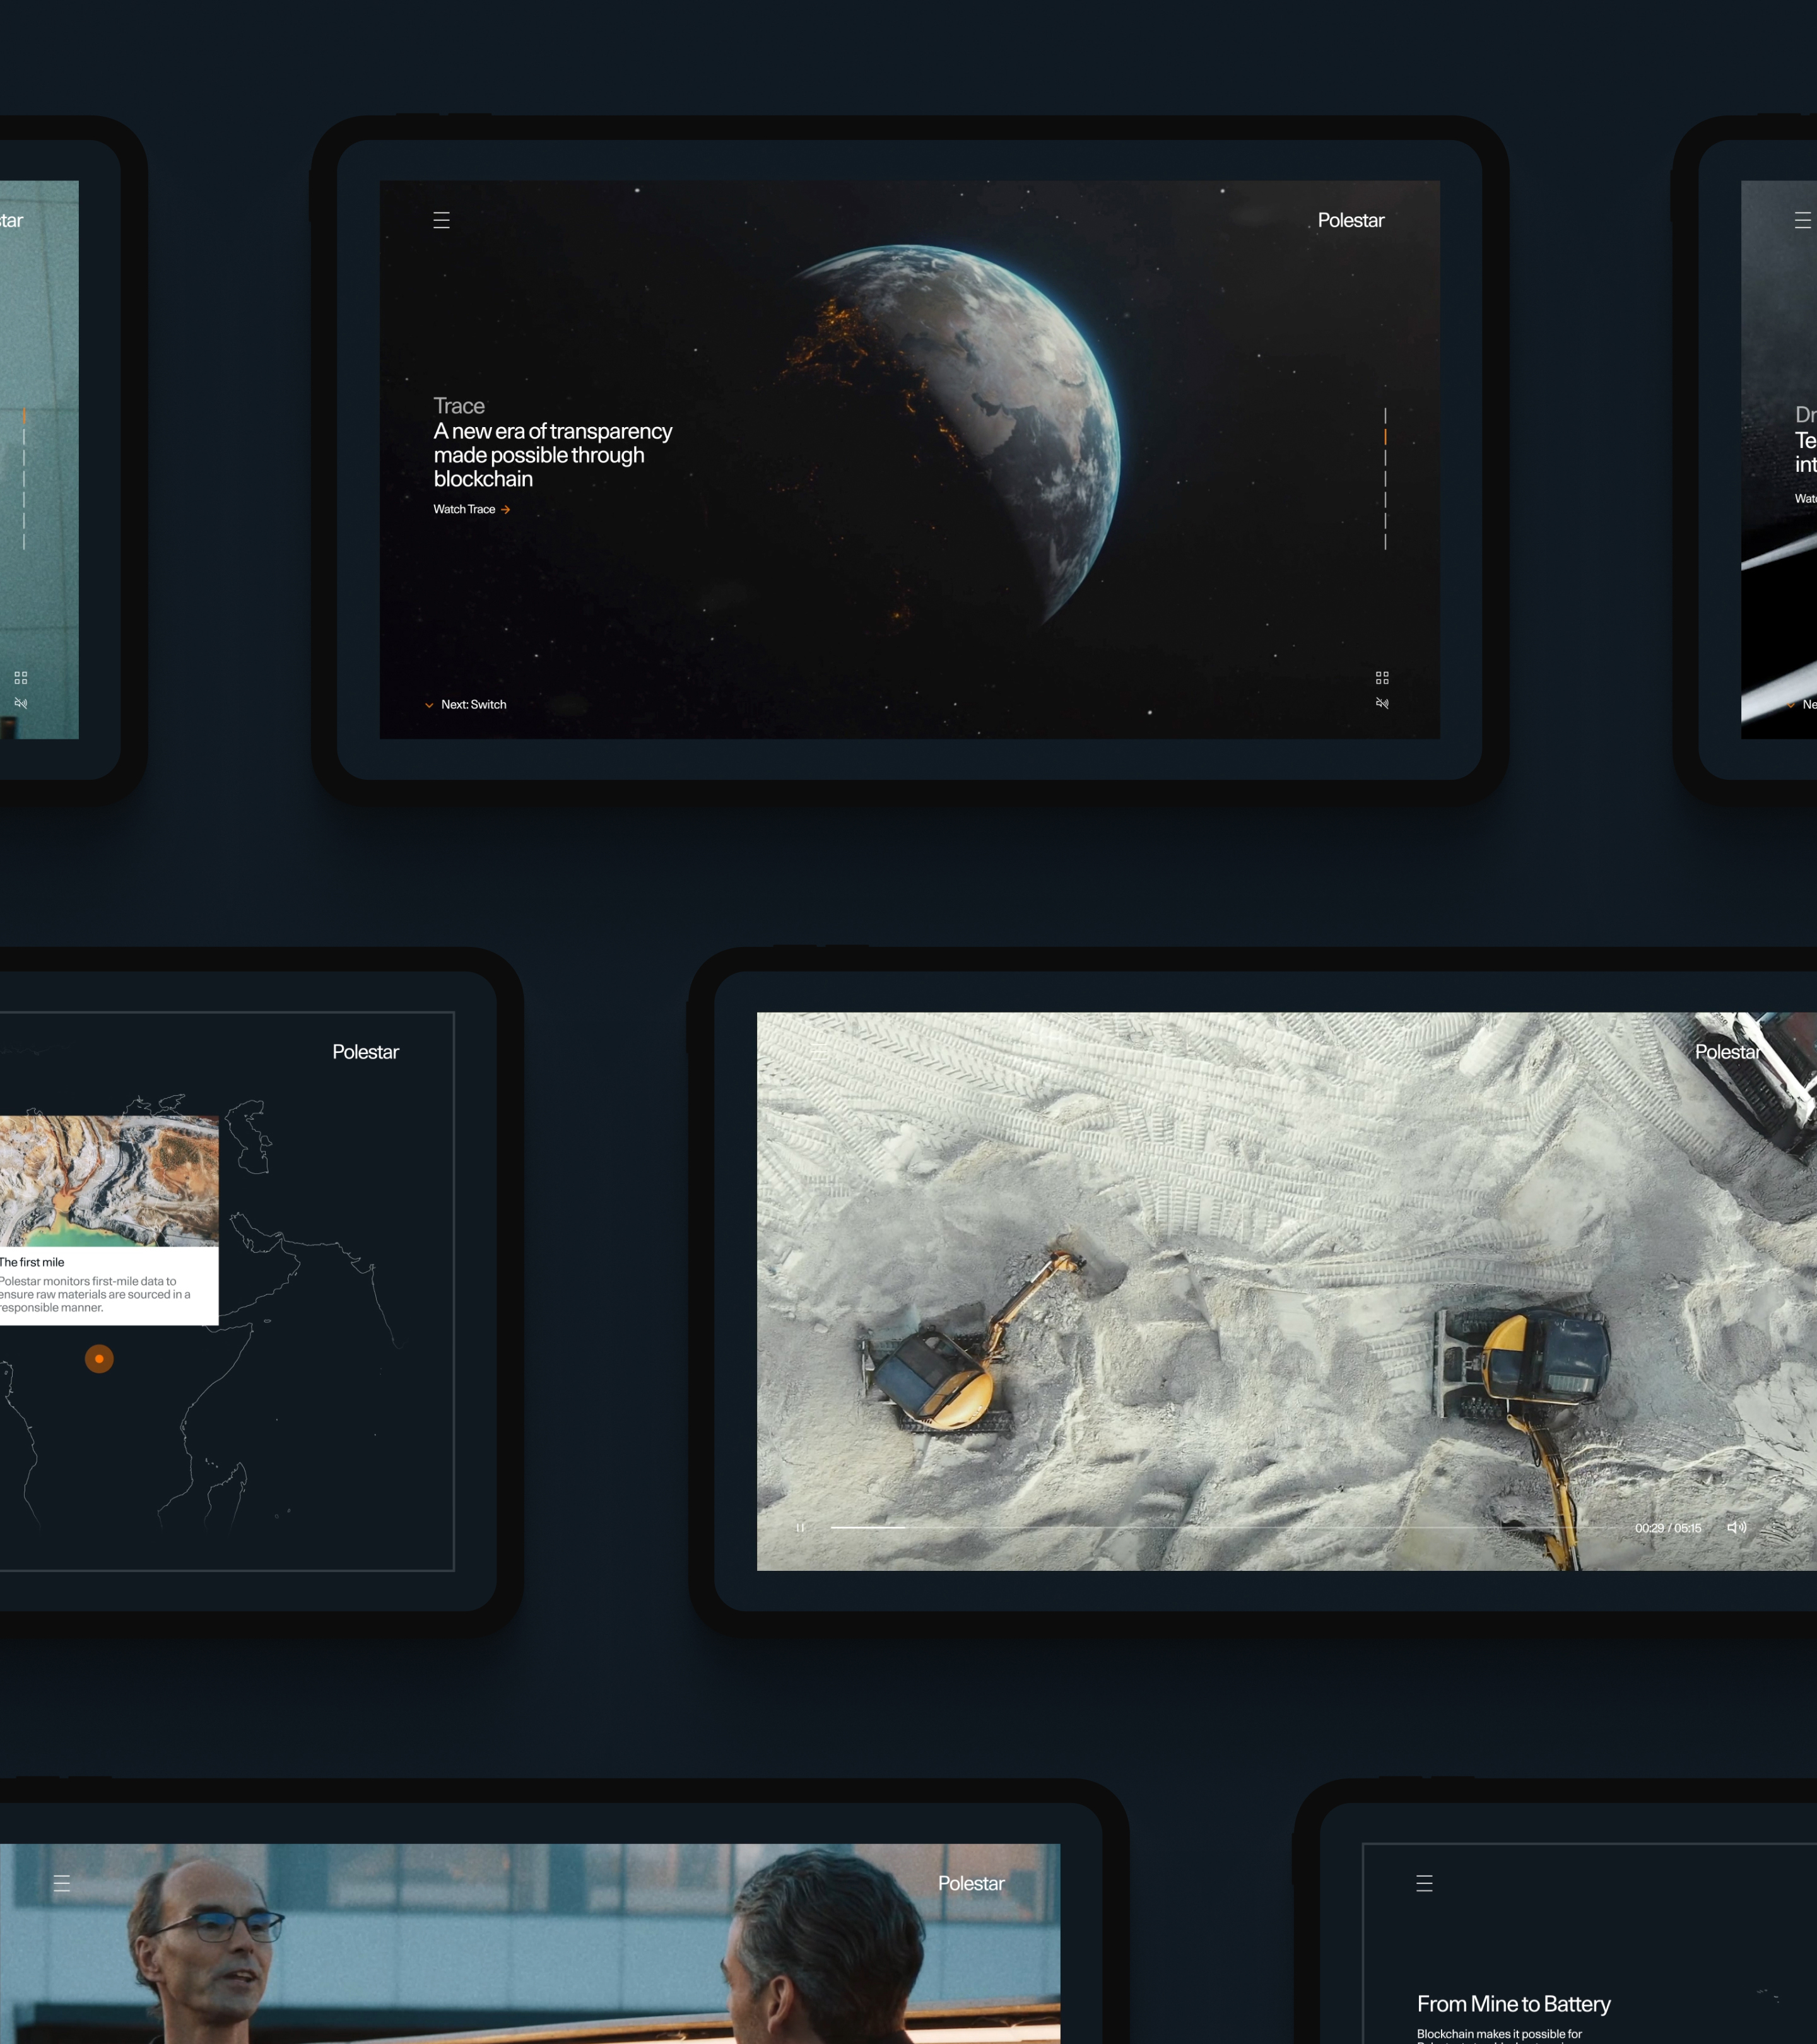 Various mobile views of the Polestar Making aNew website, main example is a screen showing the earth from space